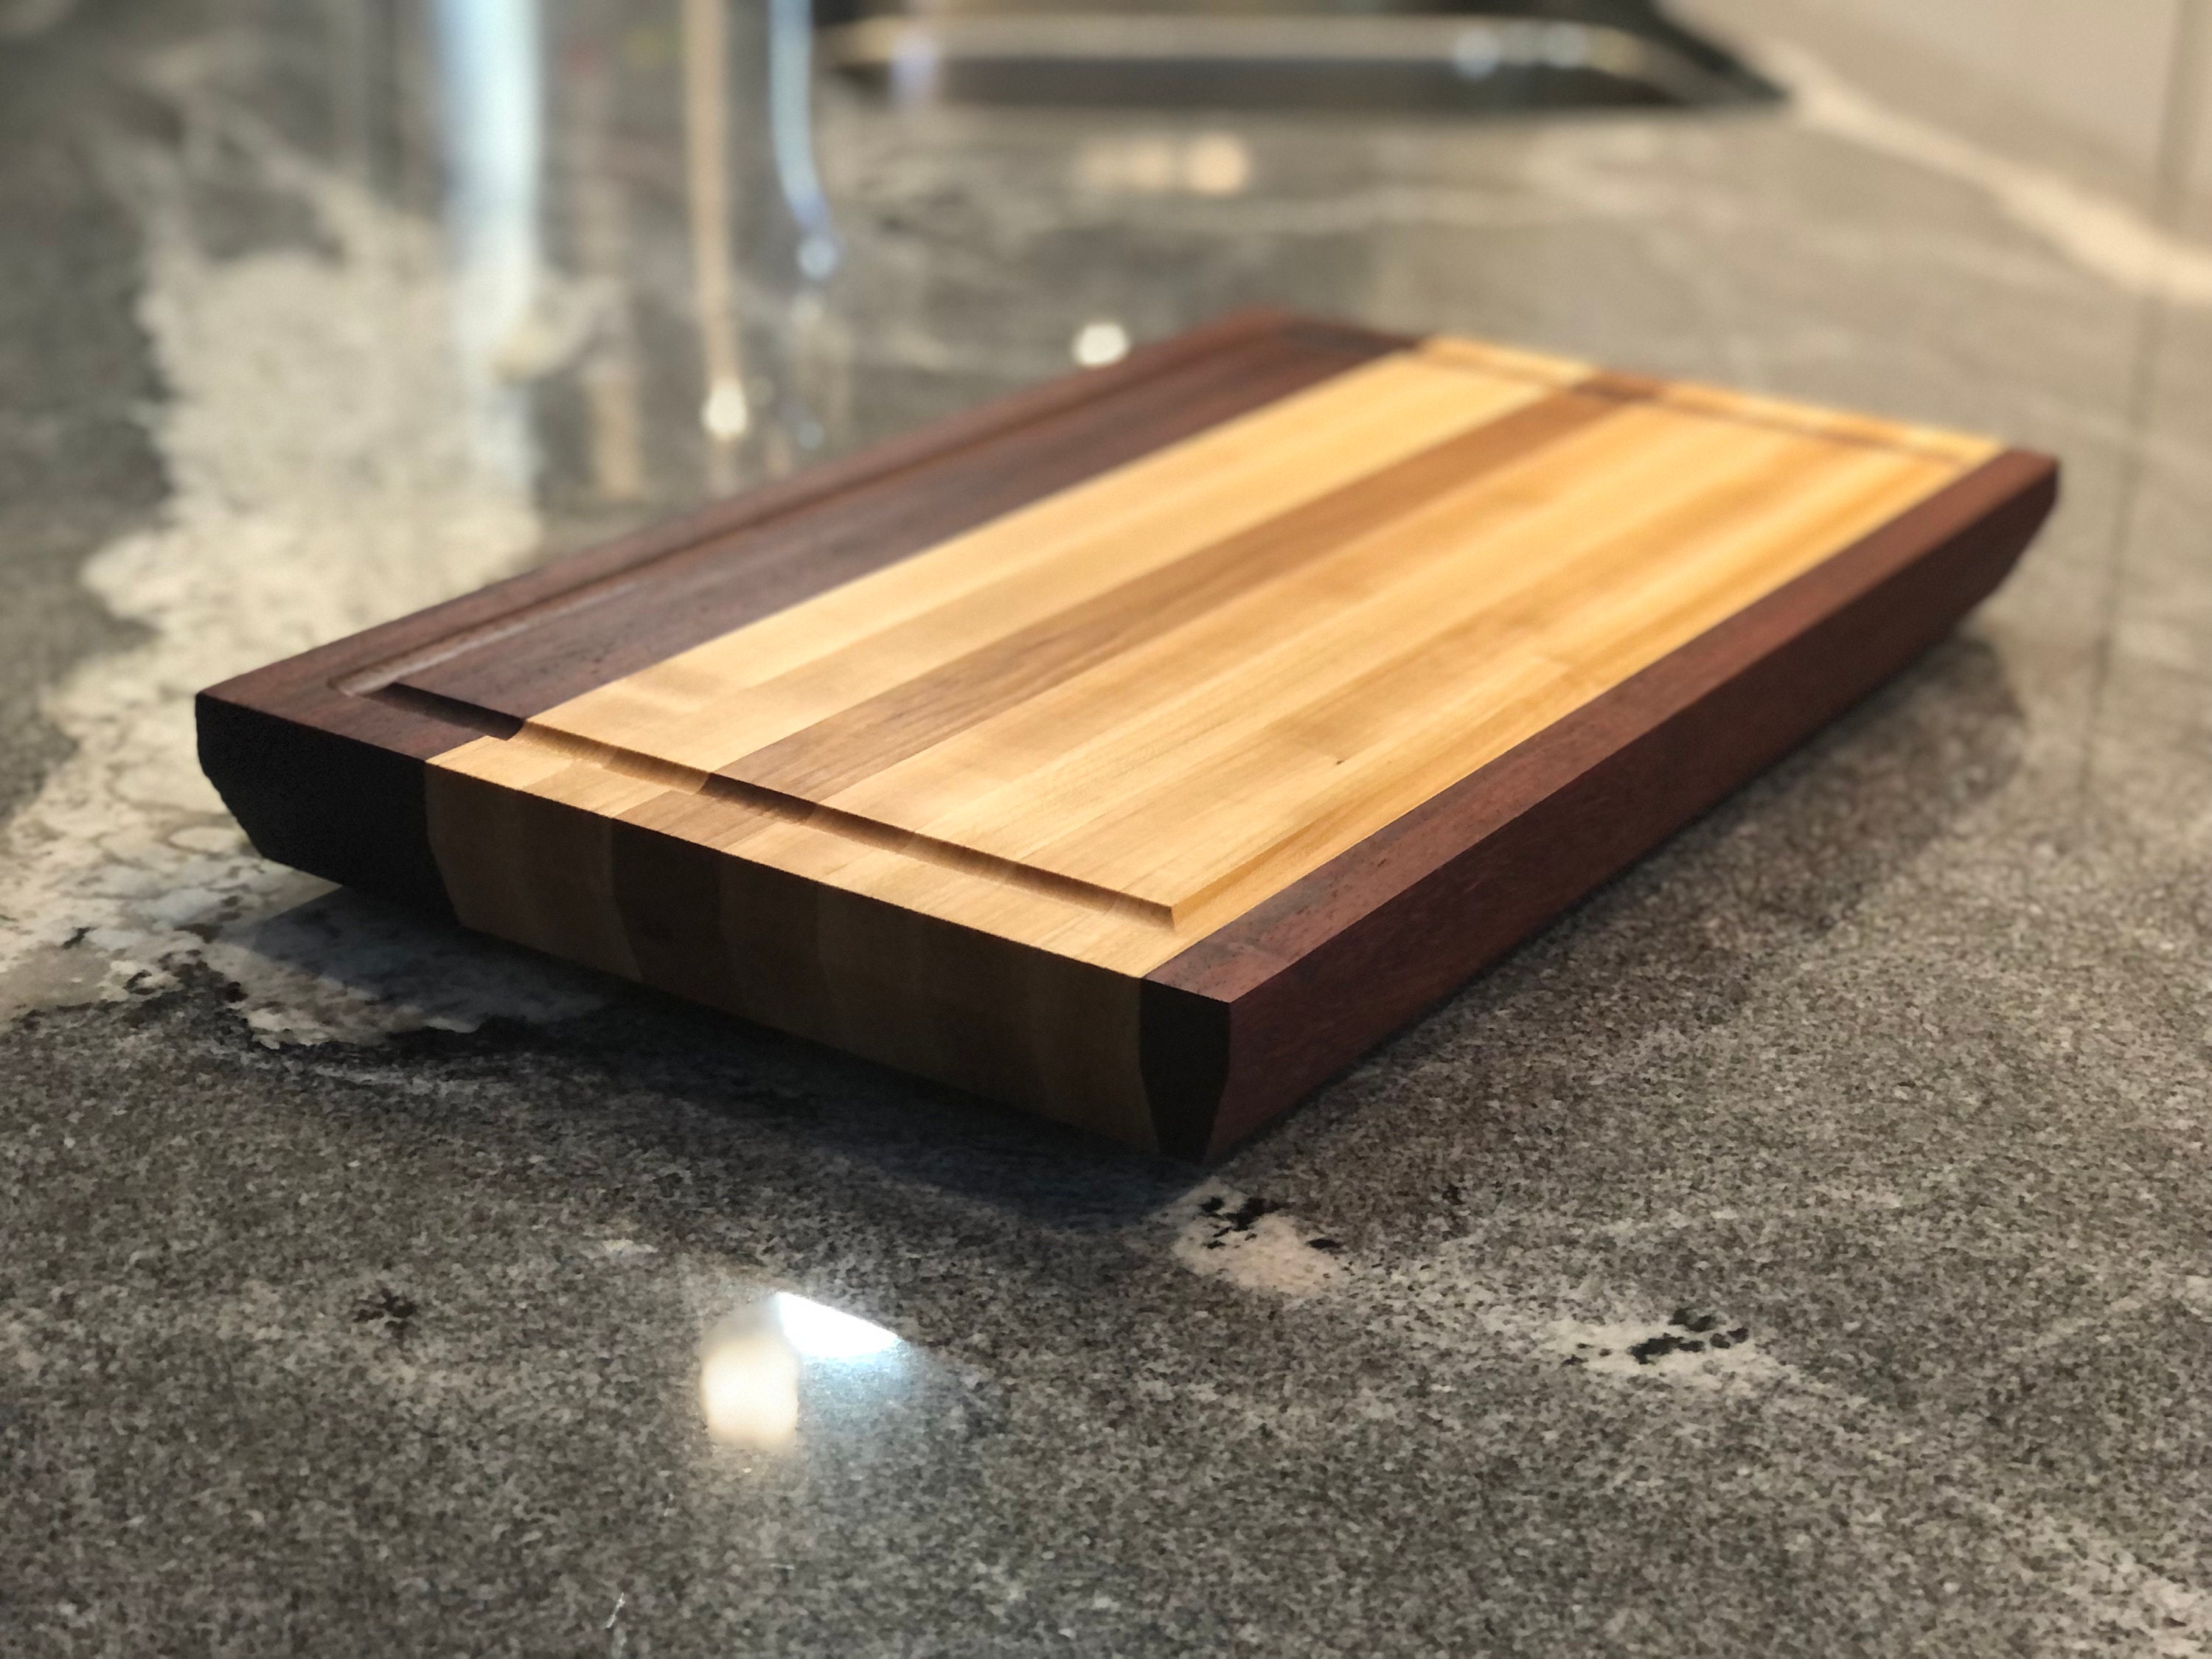  The Fine Living Co. Cutting Board, Neem Wood Chopping Board  with Handle, 0.6 Thick Chopping Board with Juice Grooves, Non-slip Board  for Kitchen Countertop, Food-grade Wooden Board, 20x10: Home & Kitchen